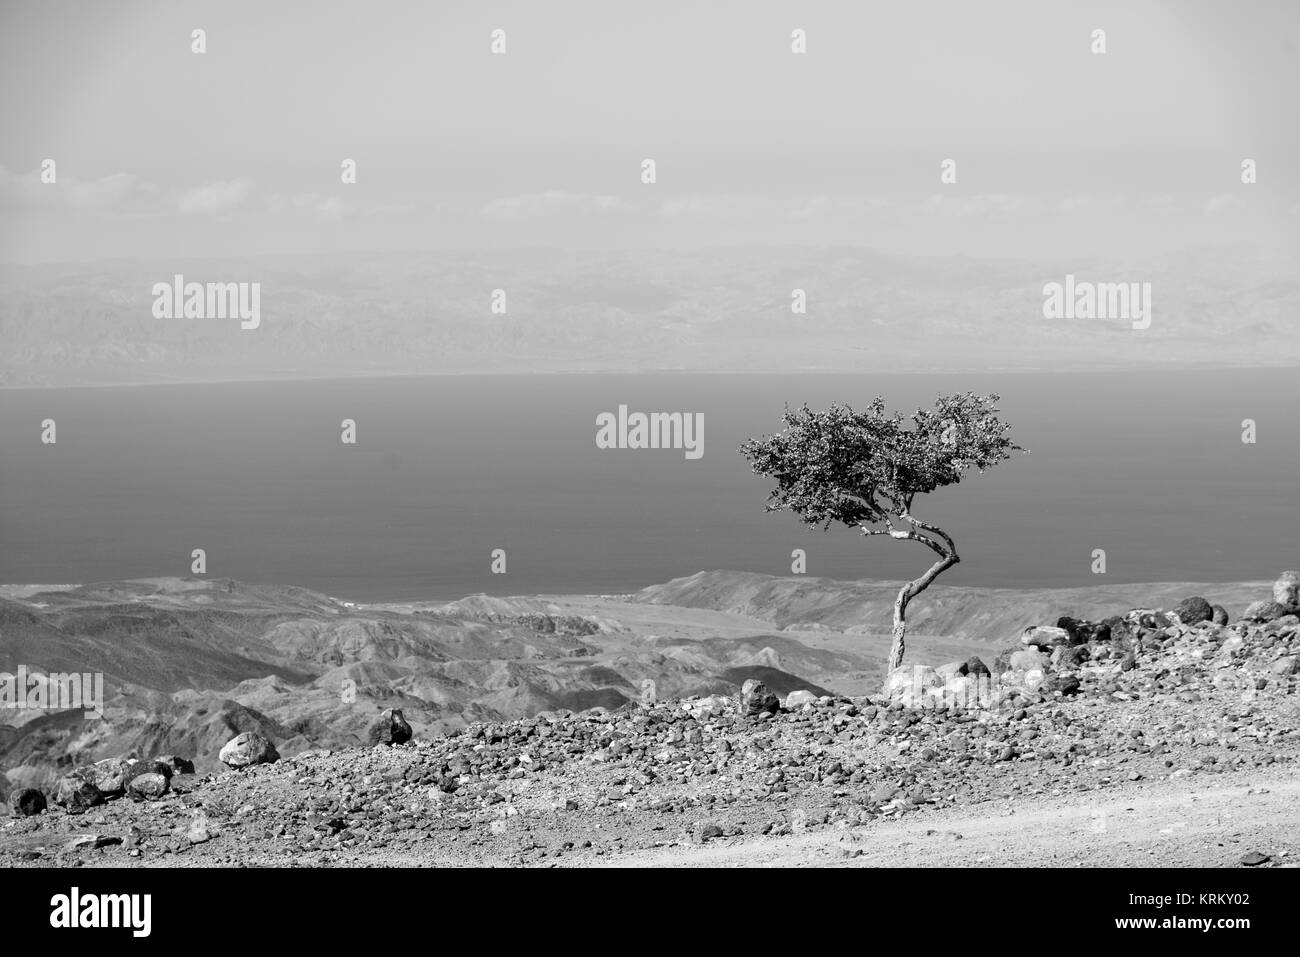 A view of the Gulf of Tadjoura from Arta, Djibouti, East Africa in Black and White Stock Photo